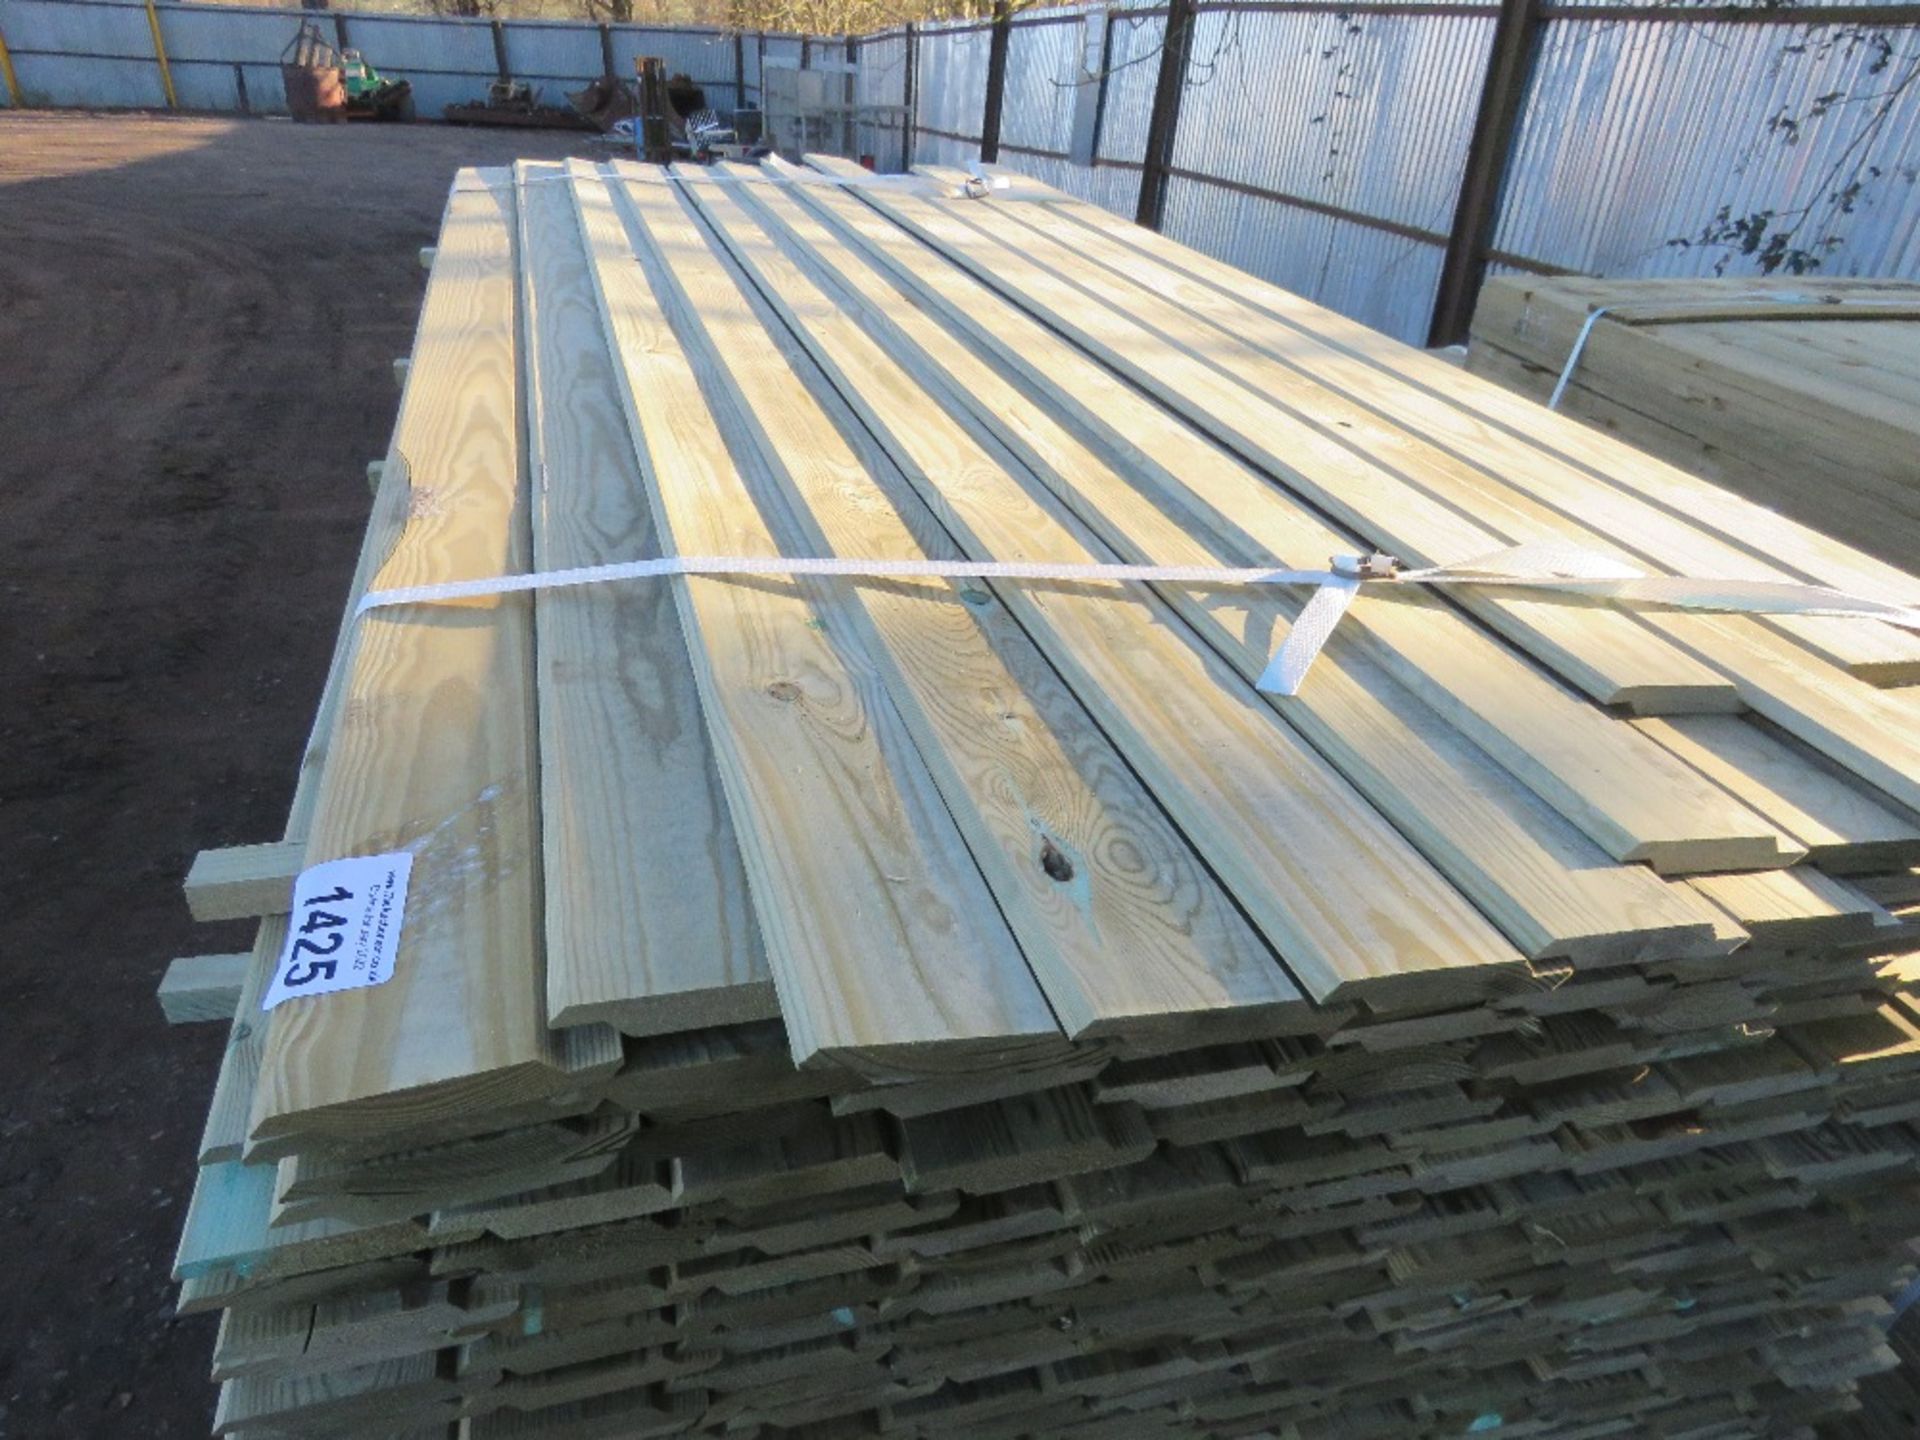 LARGE PACK OF TREATED SHIPLAP FENCE CLADDING TIMBER BOARDS. SIZE: 1.73M LENGTH X 10CM WIDTH APPROX. - Image 3 of 3